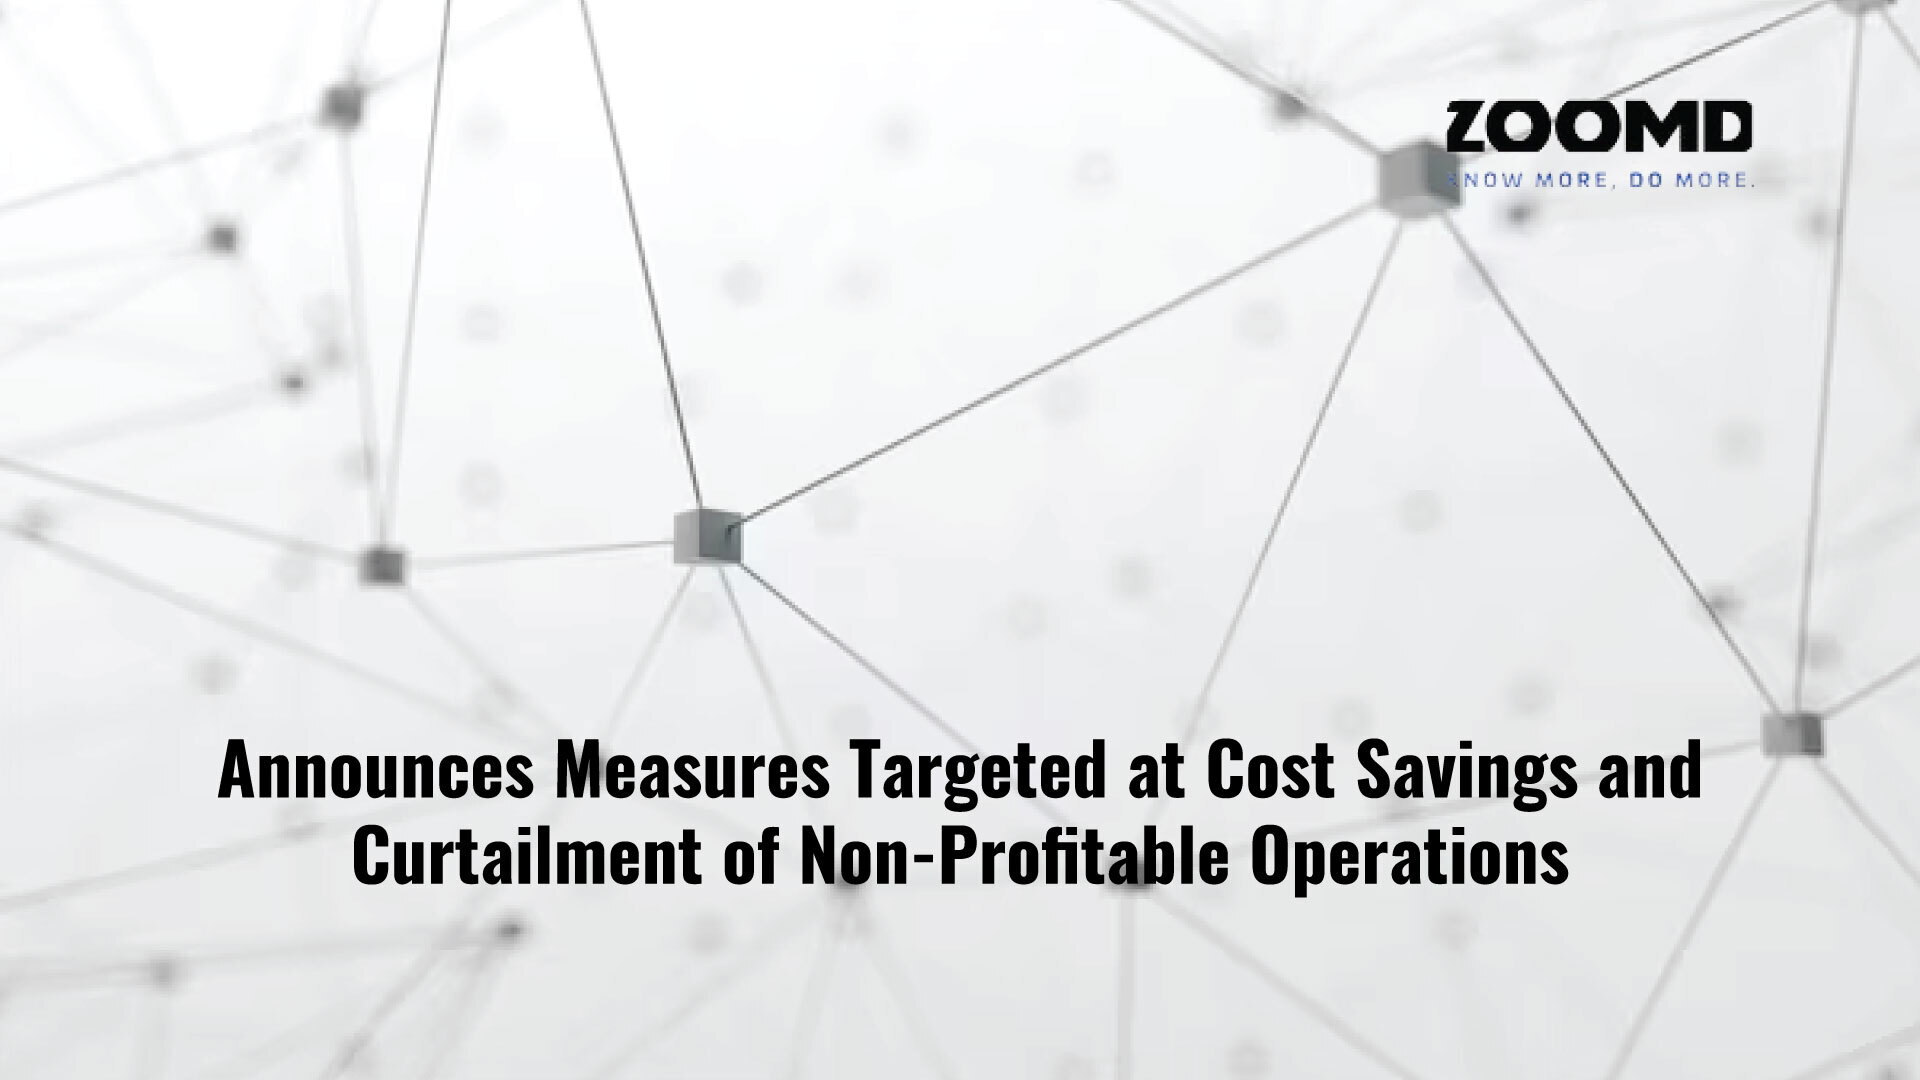 Zoomd Technologies announces measures targeted at cost savings and curtailment of non-profitable operations to optimize business lines and product offerings for improving growth, profitability, and cash flow from operations